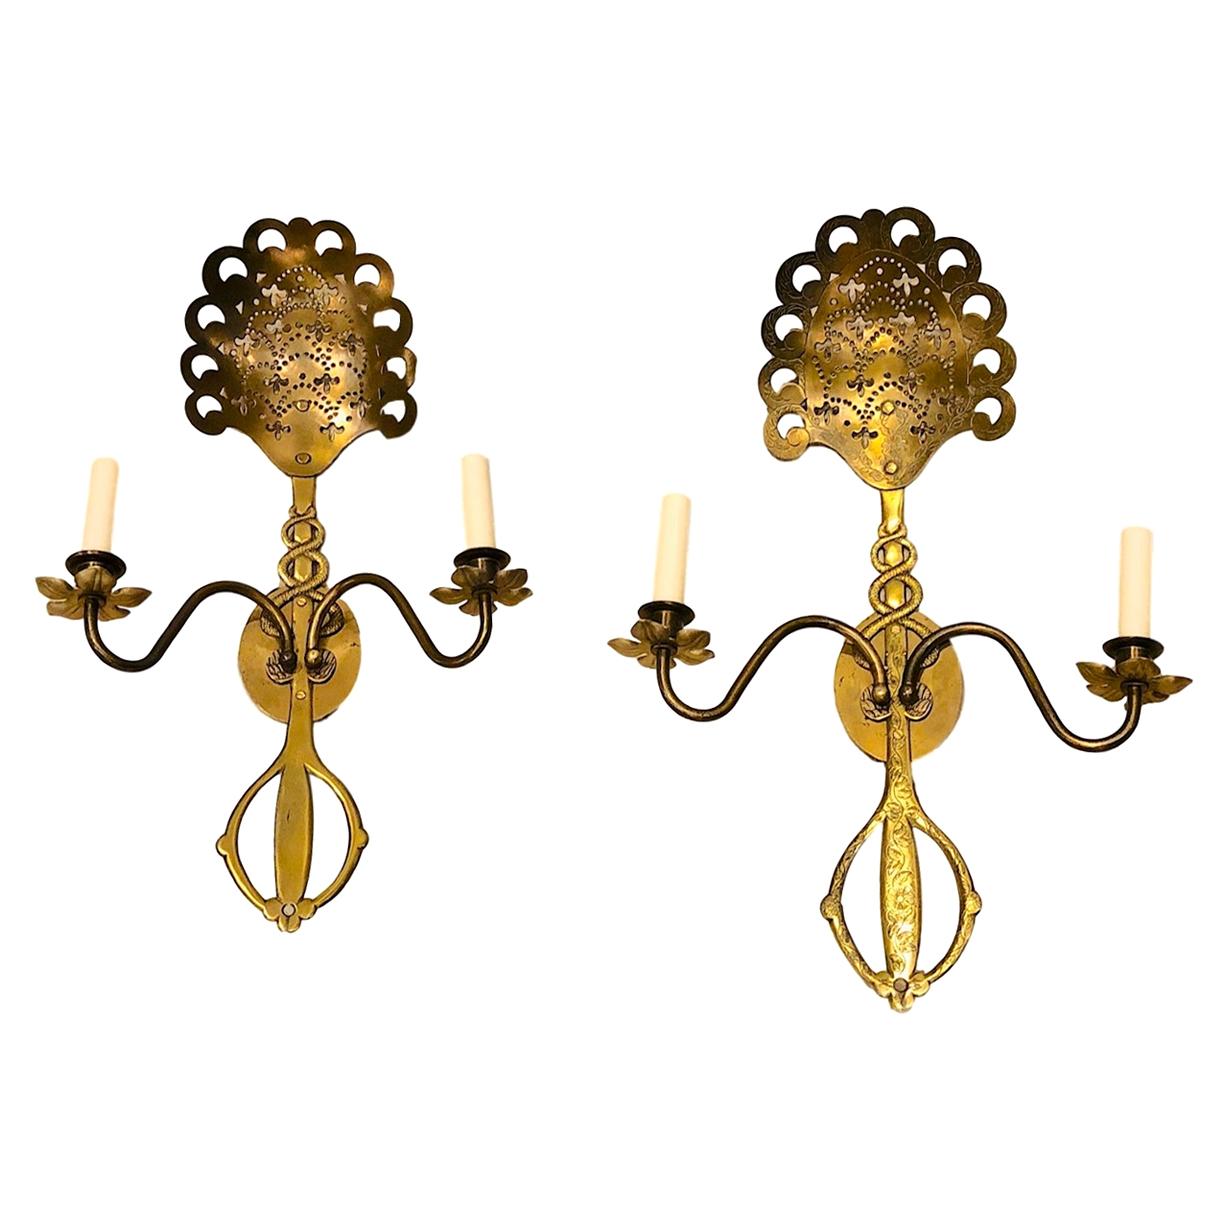 Pair of Middle Eastern Pierced Sconces